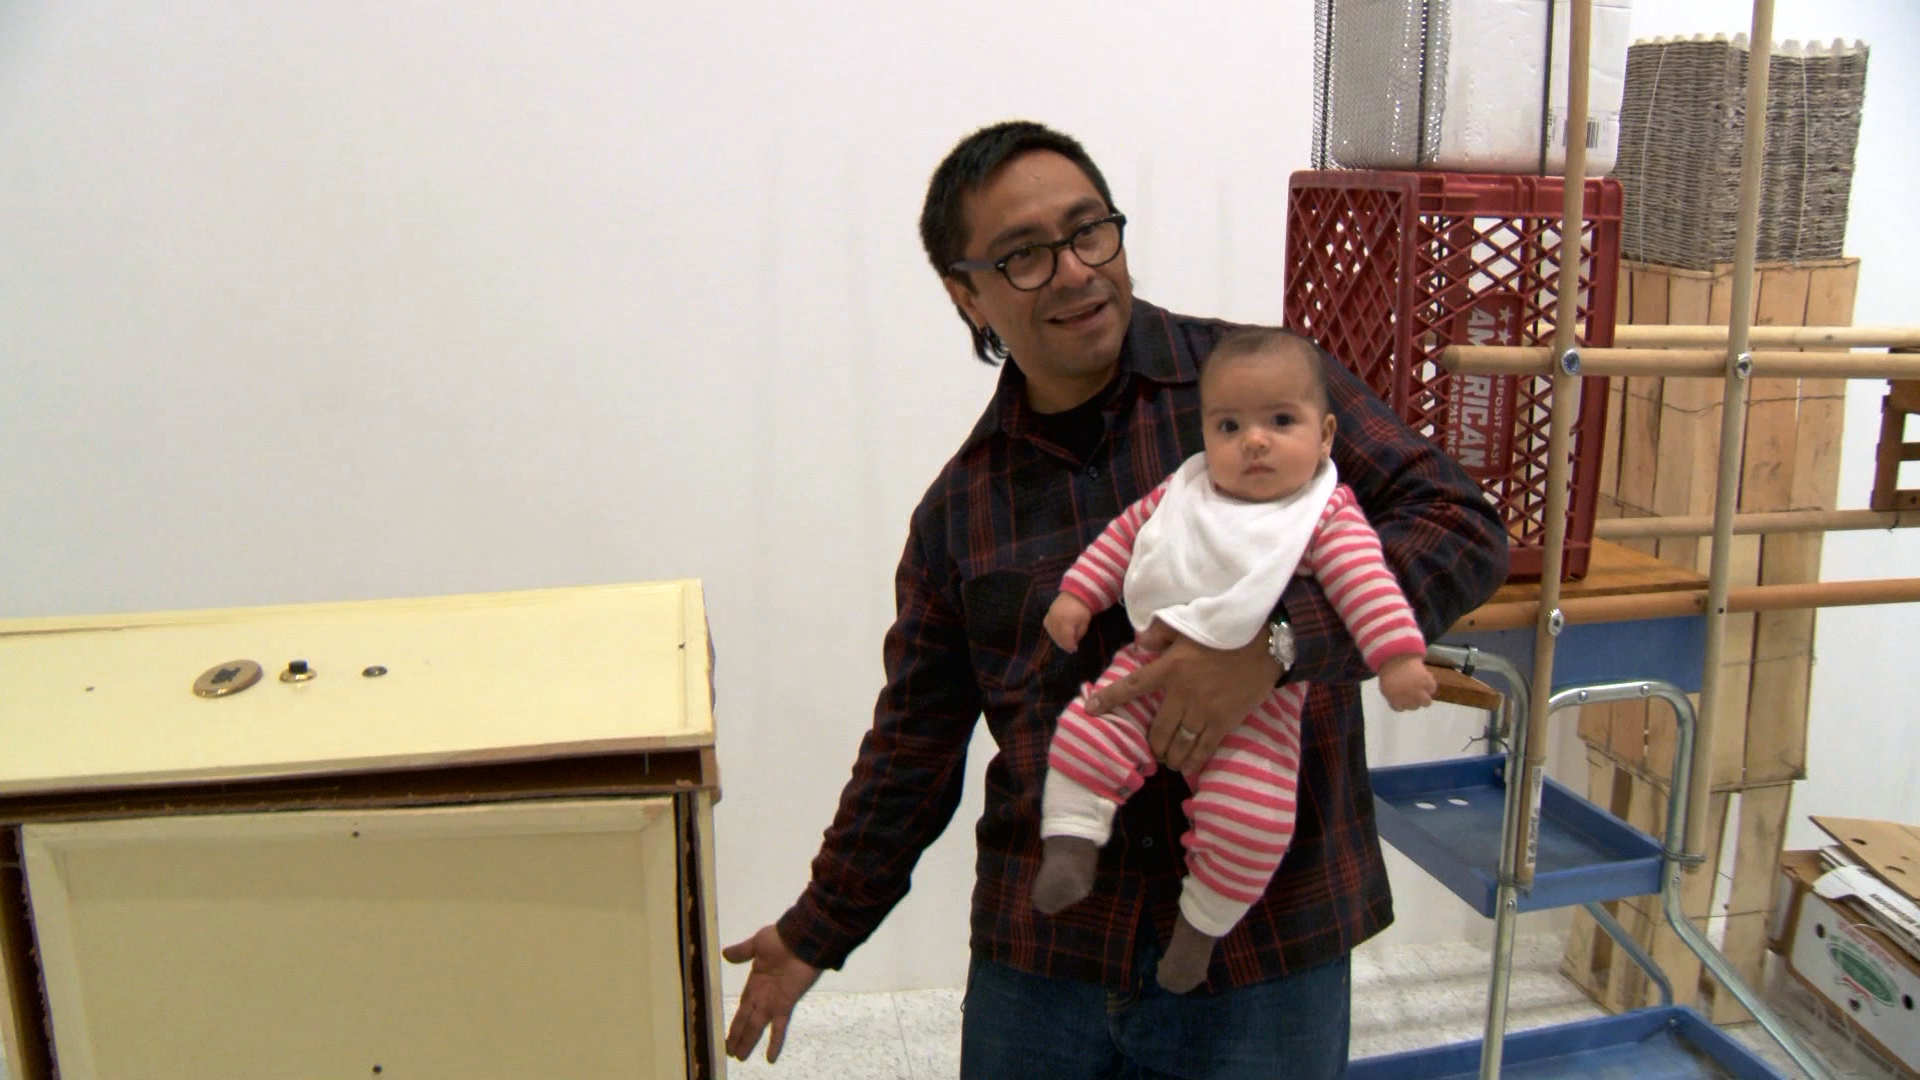 Abraham Cruzvillegas with his daughter installing The Autoconstrucción Suites at the Walker Art Center in Minneapolis, Minnesota. Production still from the series ART21 Exclusive. © ART21, Inc. 2016. Cinematography: Mark Falstad.